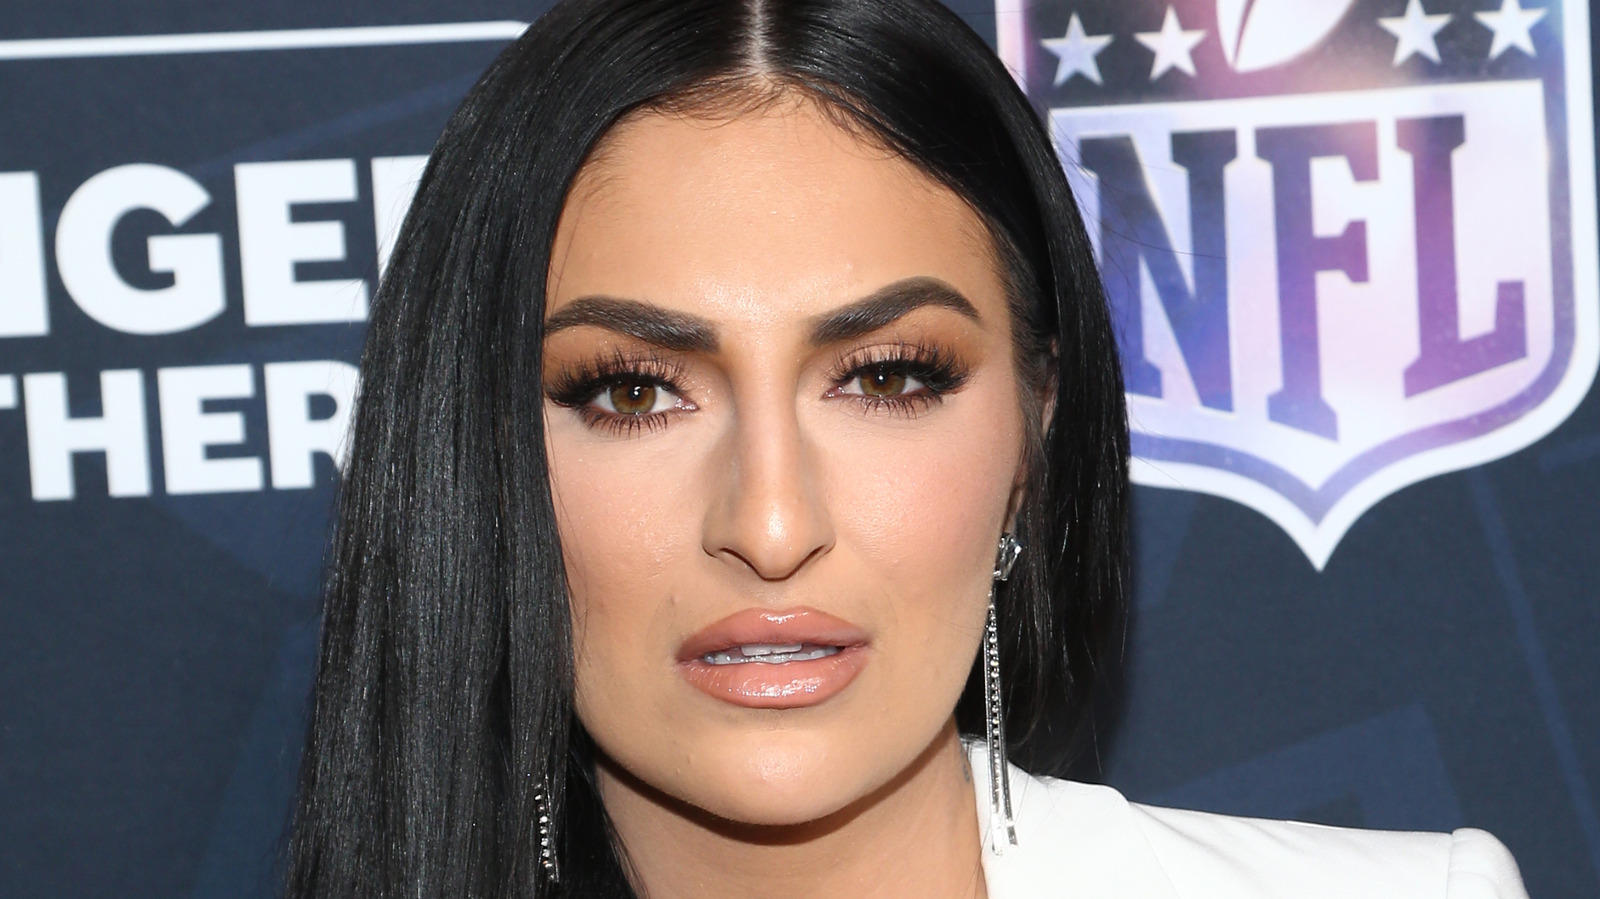 What happened to Sonya Deville following gun charges earlier this year?